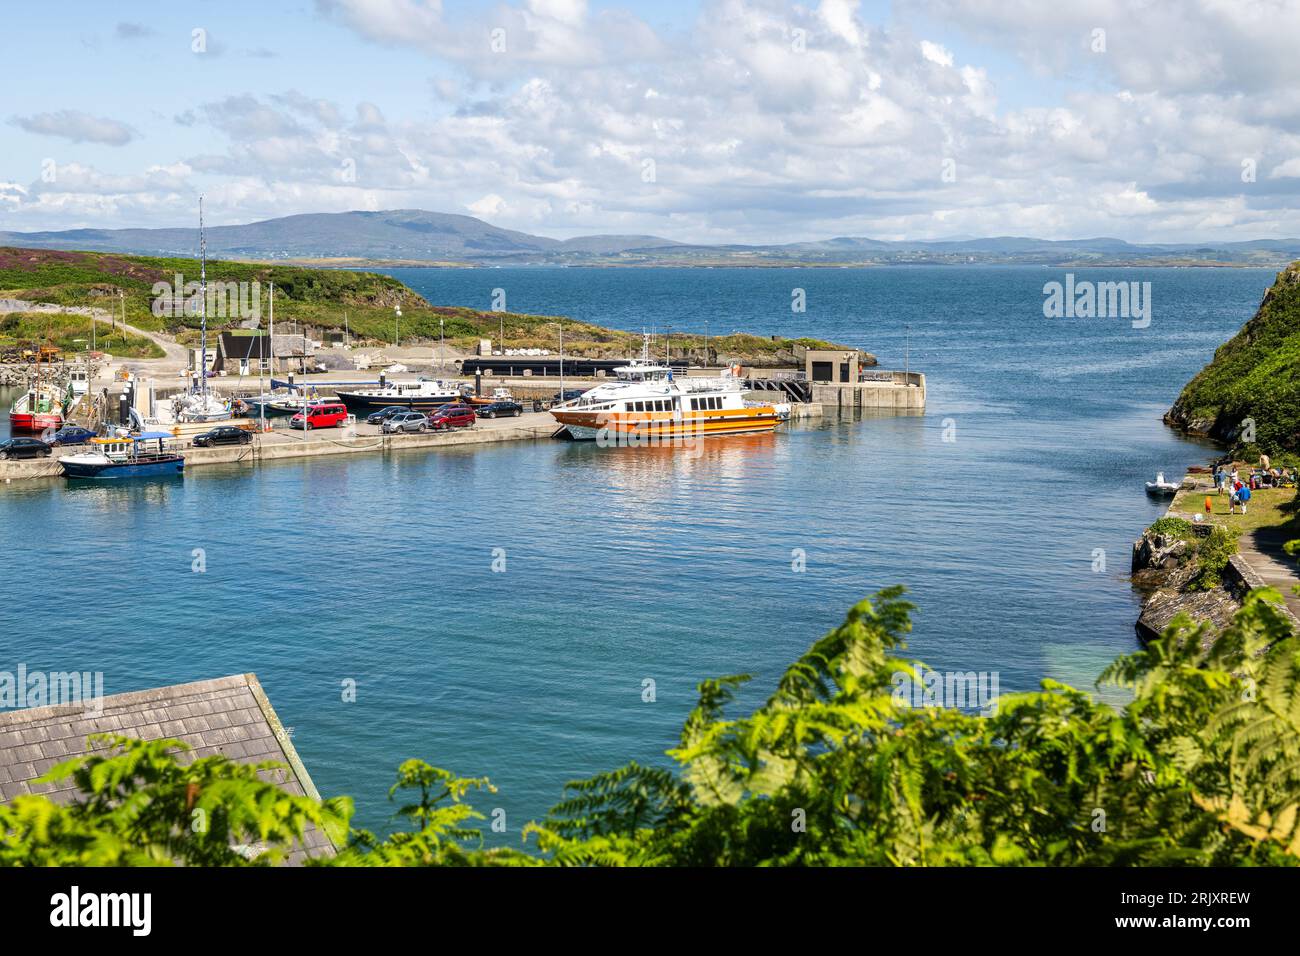 Cape Clear ferry 'Carraig Aonair' moored in the harbour of Cape Clear Island, West Cork, Ireland. Stock Photo